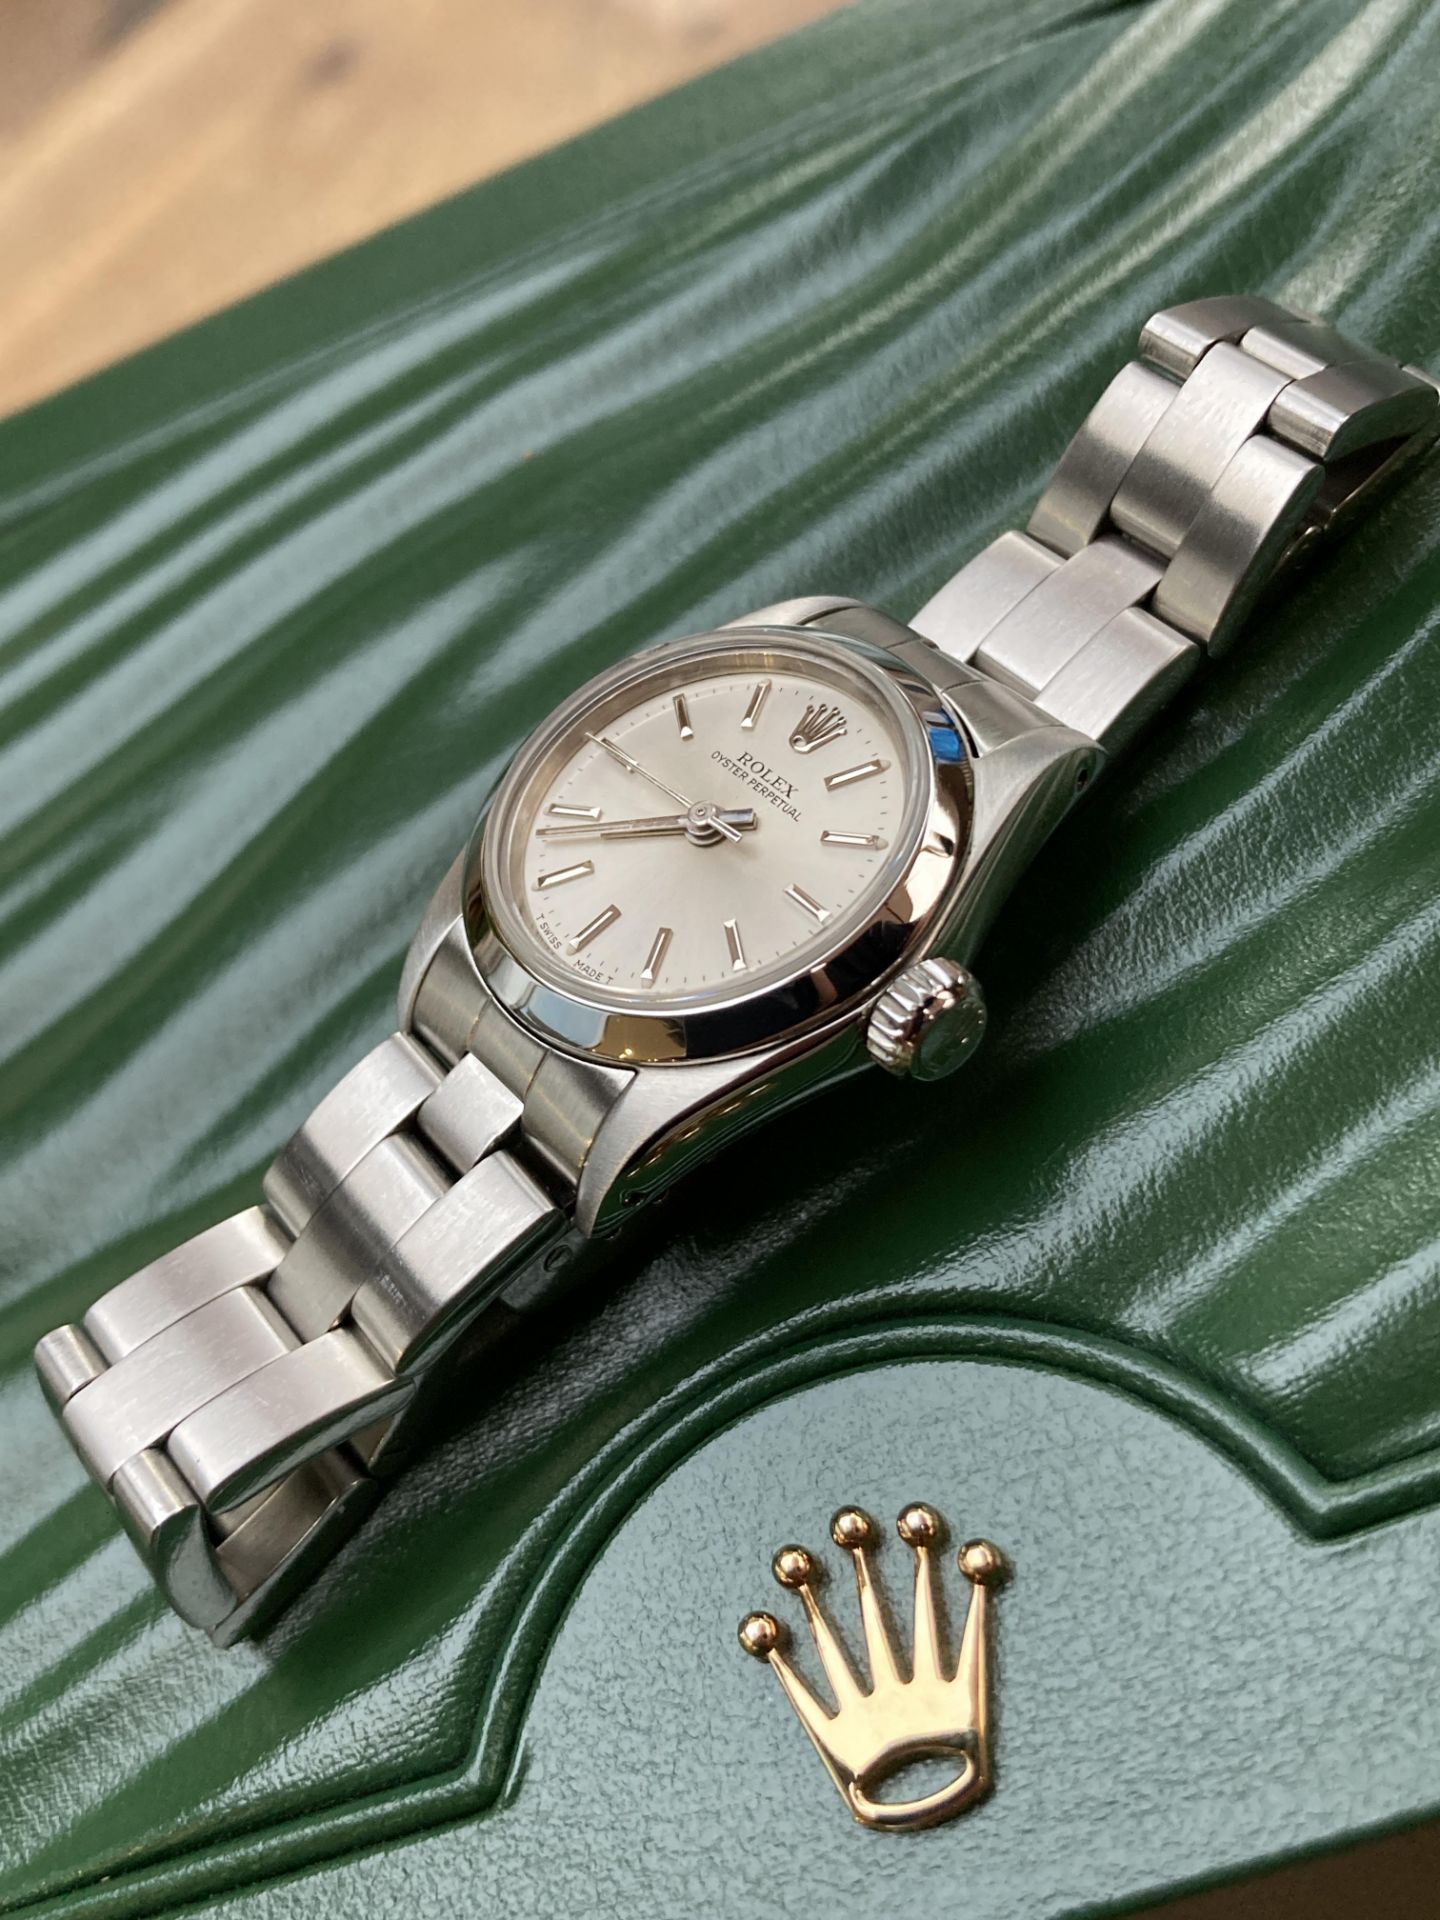 ROLEX OYSTER PERPETUAL 24MM, STAINLESS STEEL, SILVER DIAL - BOX NOT INCLUDED - Image 12 of 12